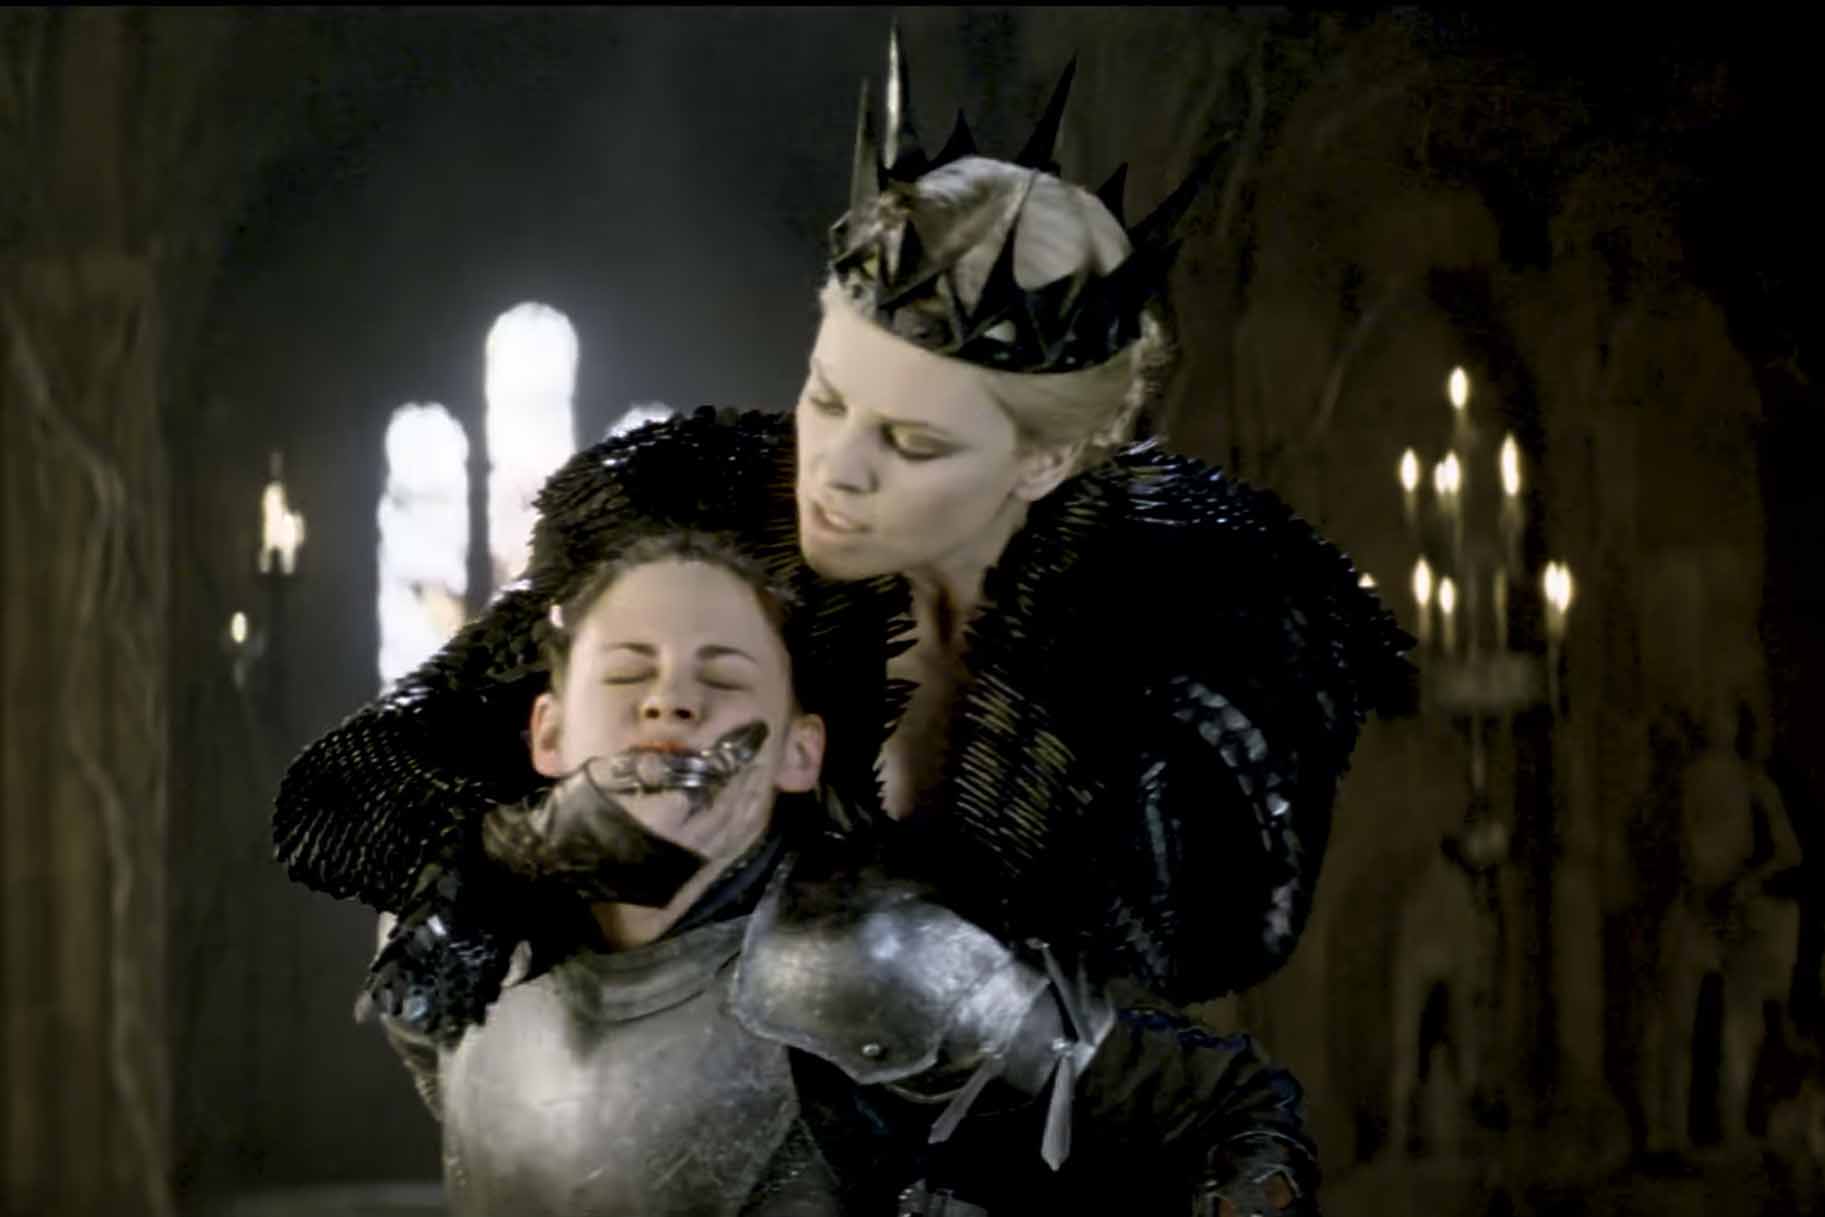 Queen Ravenna (Charlize Theron) violently holds Snow White (Kristen Stewart) in Snow White and the Huntsman (2012).